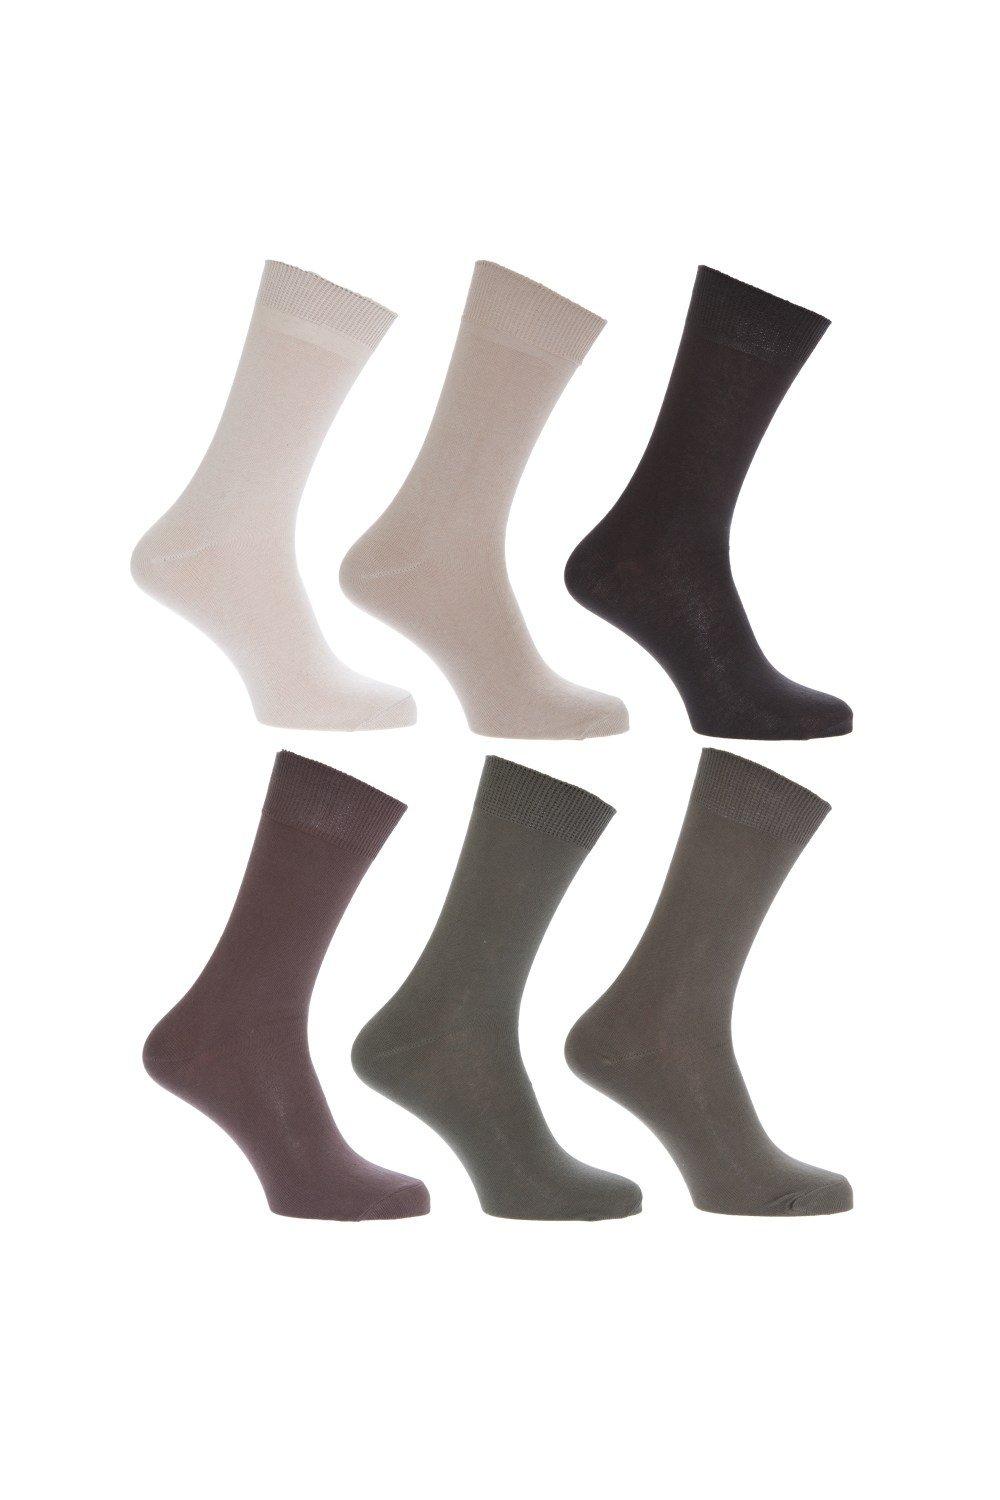 100% Cotton Plain Work/Casual Socks (Pack Of 6)